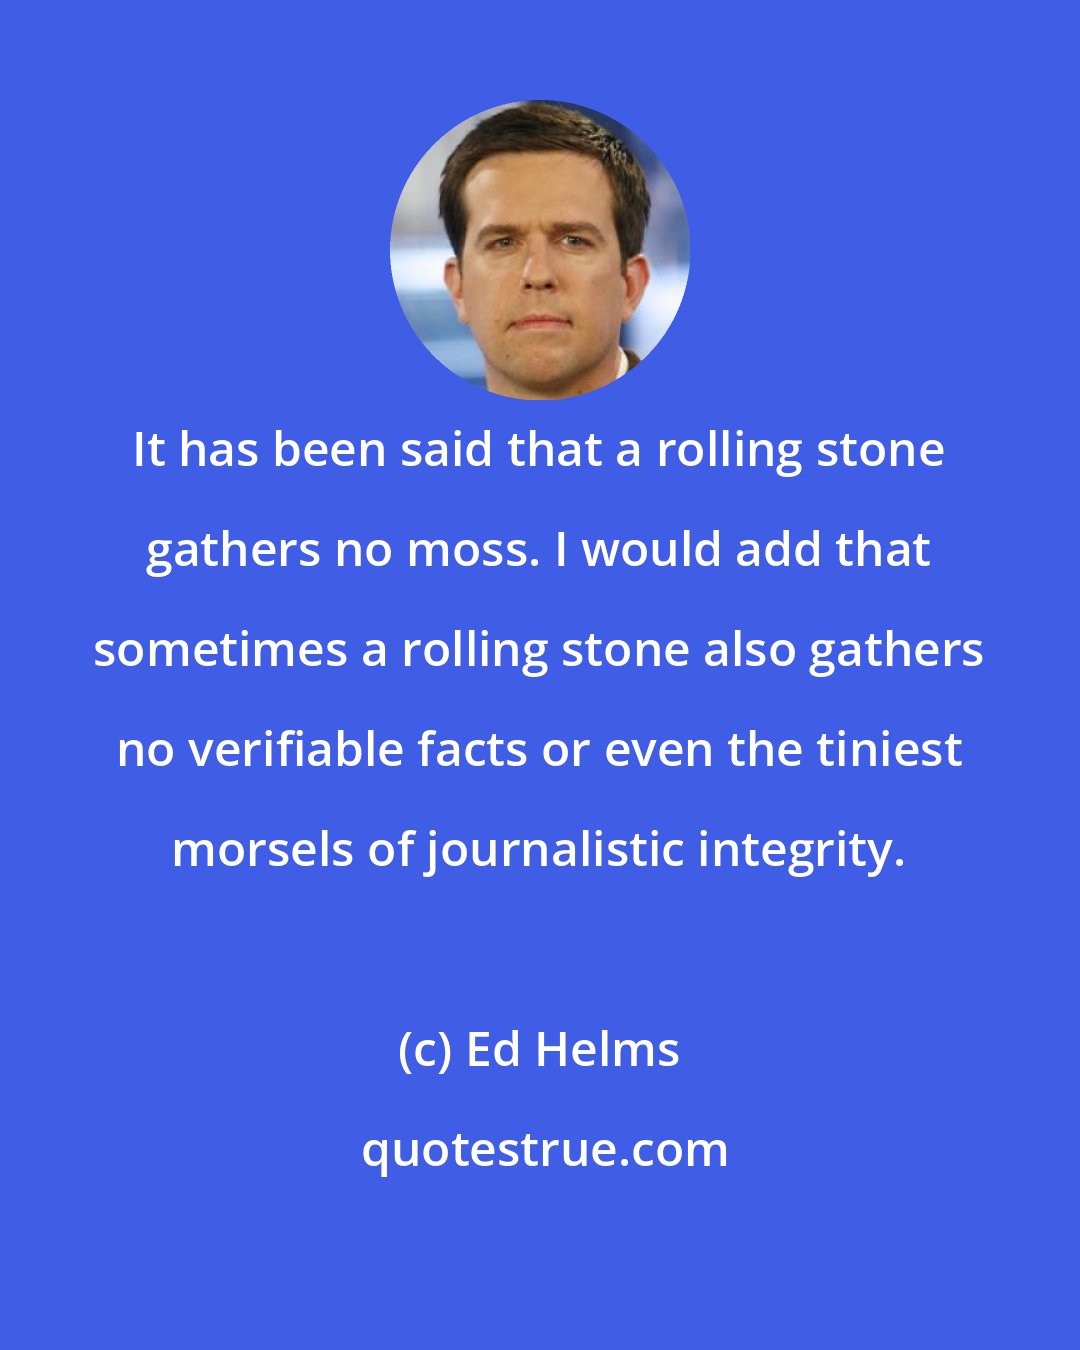 Ed Helms: It has been said that a rolling stone gathers no moss. I would add that sometimes a rolling stone also gathers no verifiable facts or even the tiniest morsels of journalistic integrity.